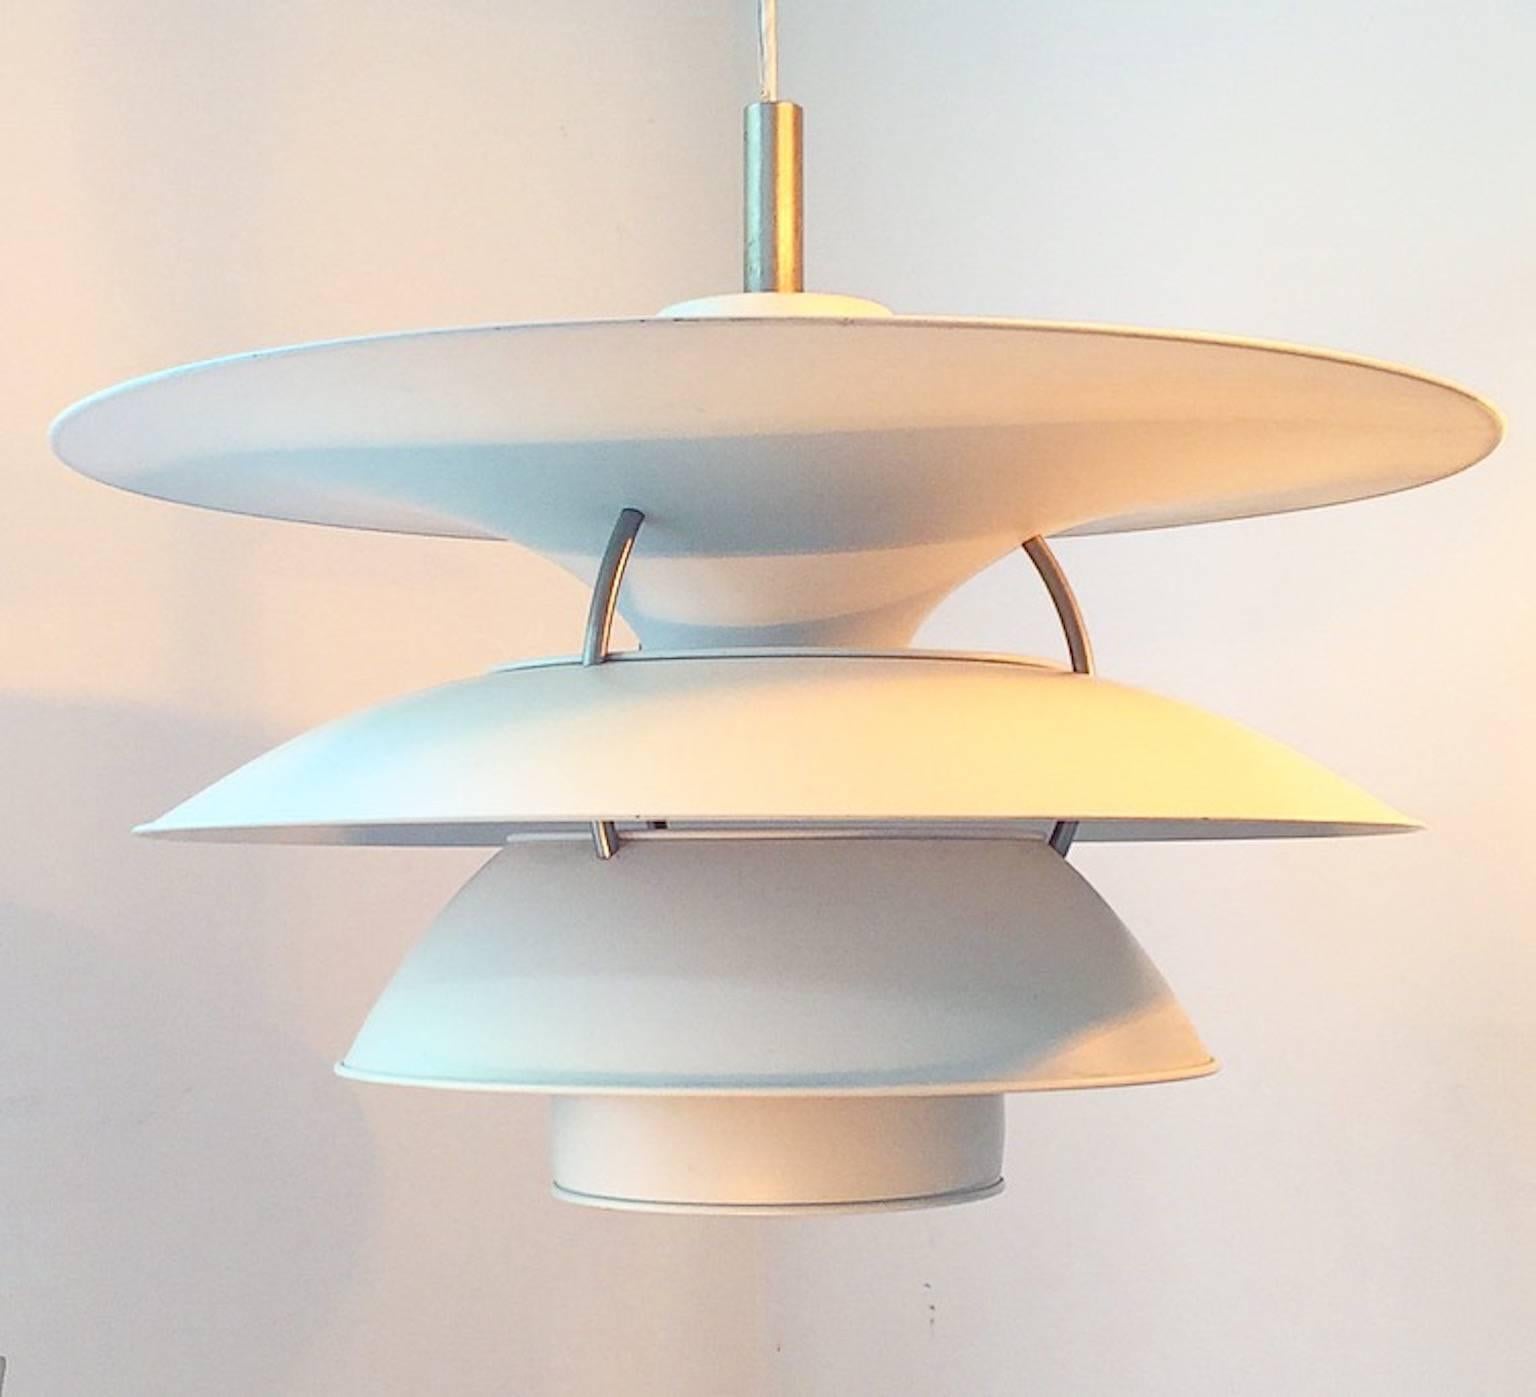 This is the large version of the ceiling lamp designed by Poul Henningensen for the exhibition hall Charlottenborg in Copenhagen in 1979 and manufactured by Louis Poulsen.

The famous shade system PH 6,5 - 6 by Poul Henningsen ensures a beautiful